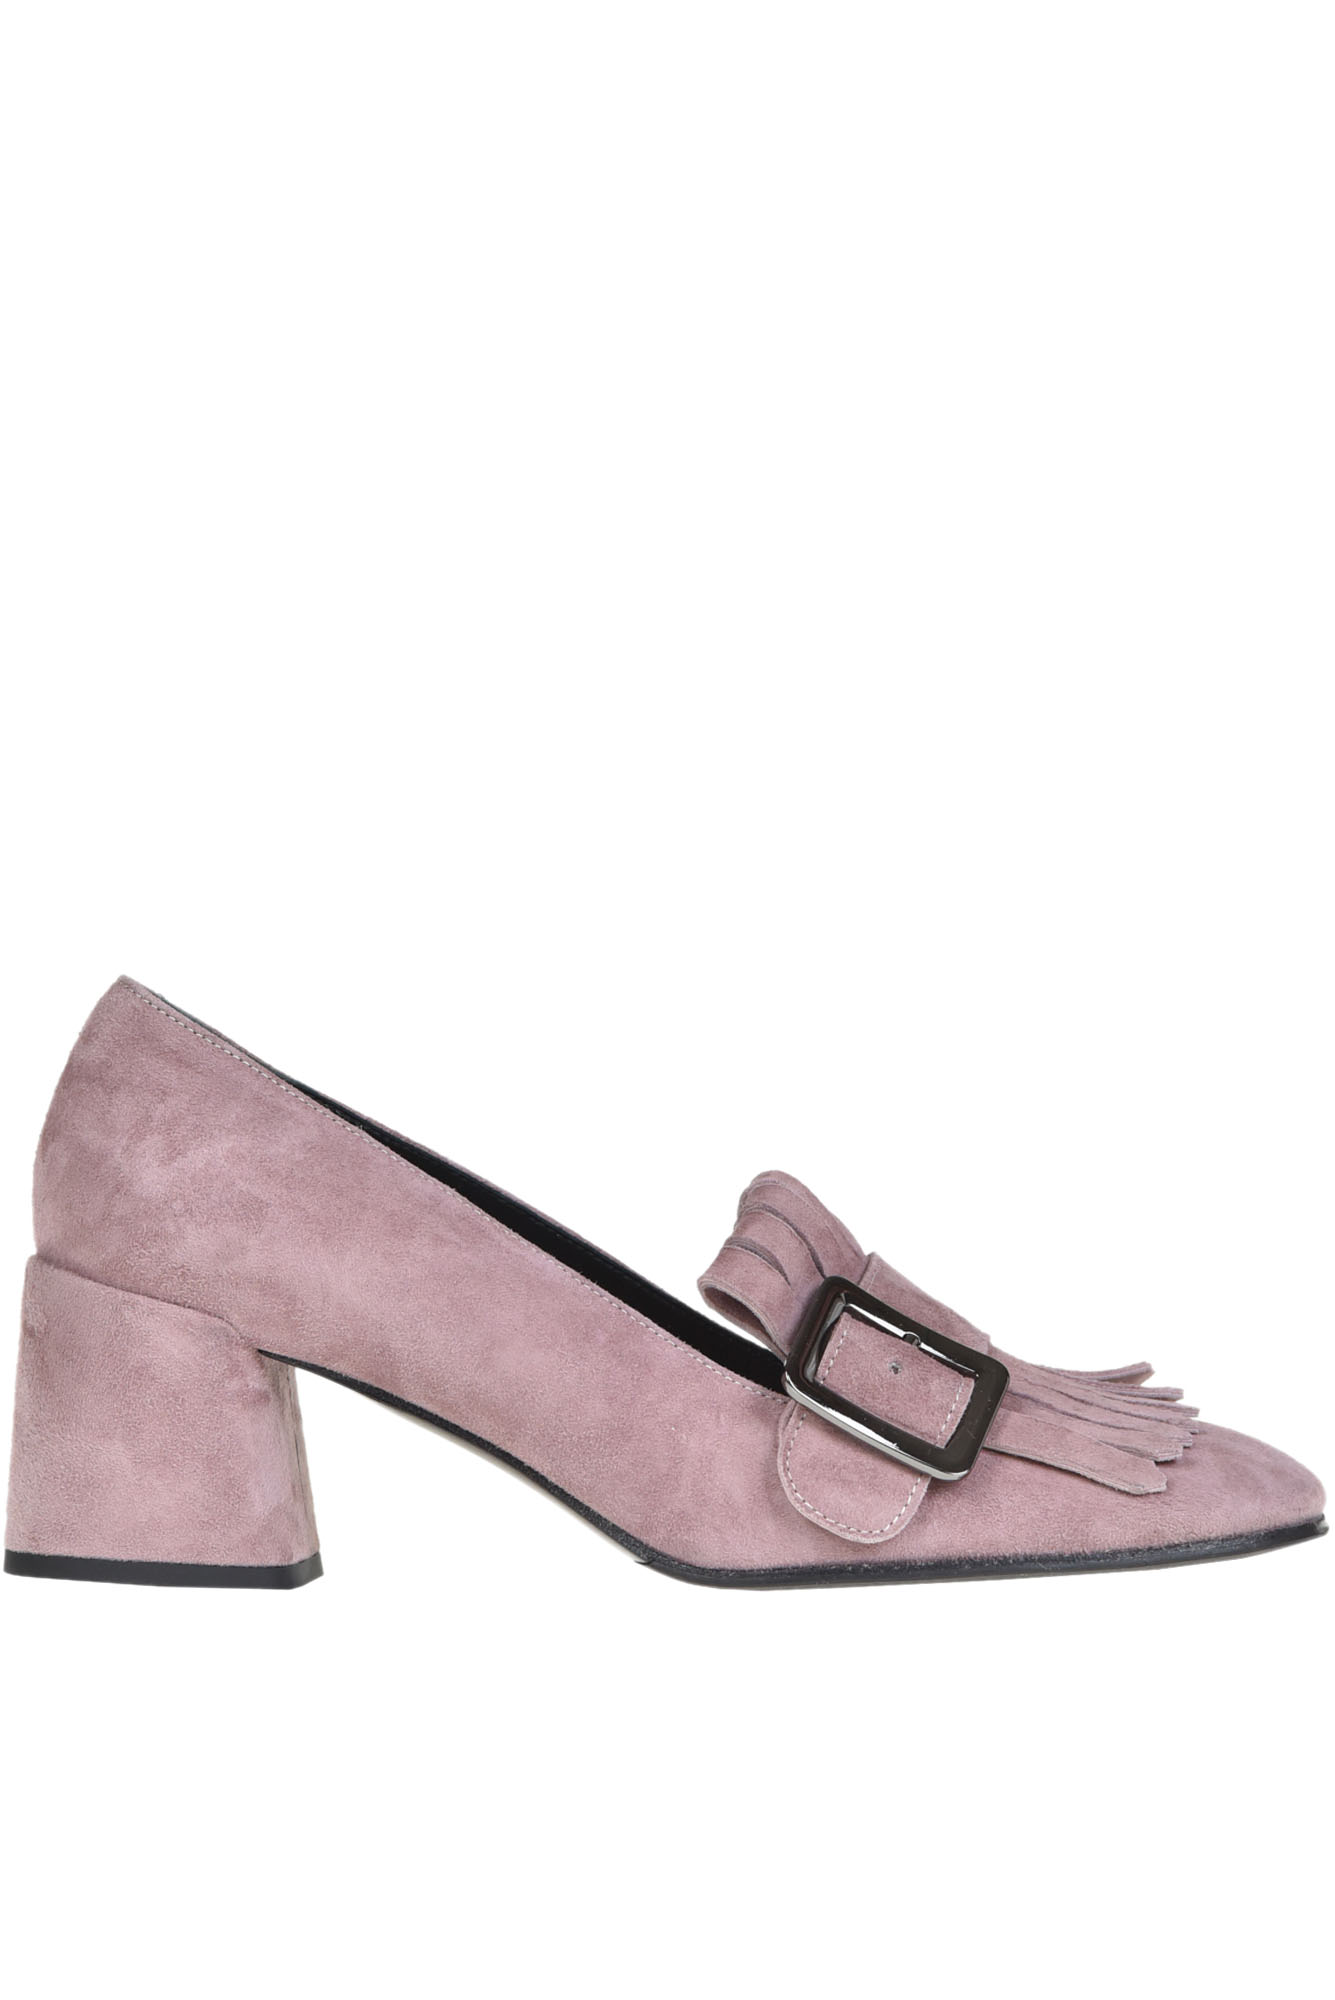 Guglielmo Rotta Heeled Suede Loafers In Lilac